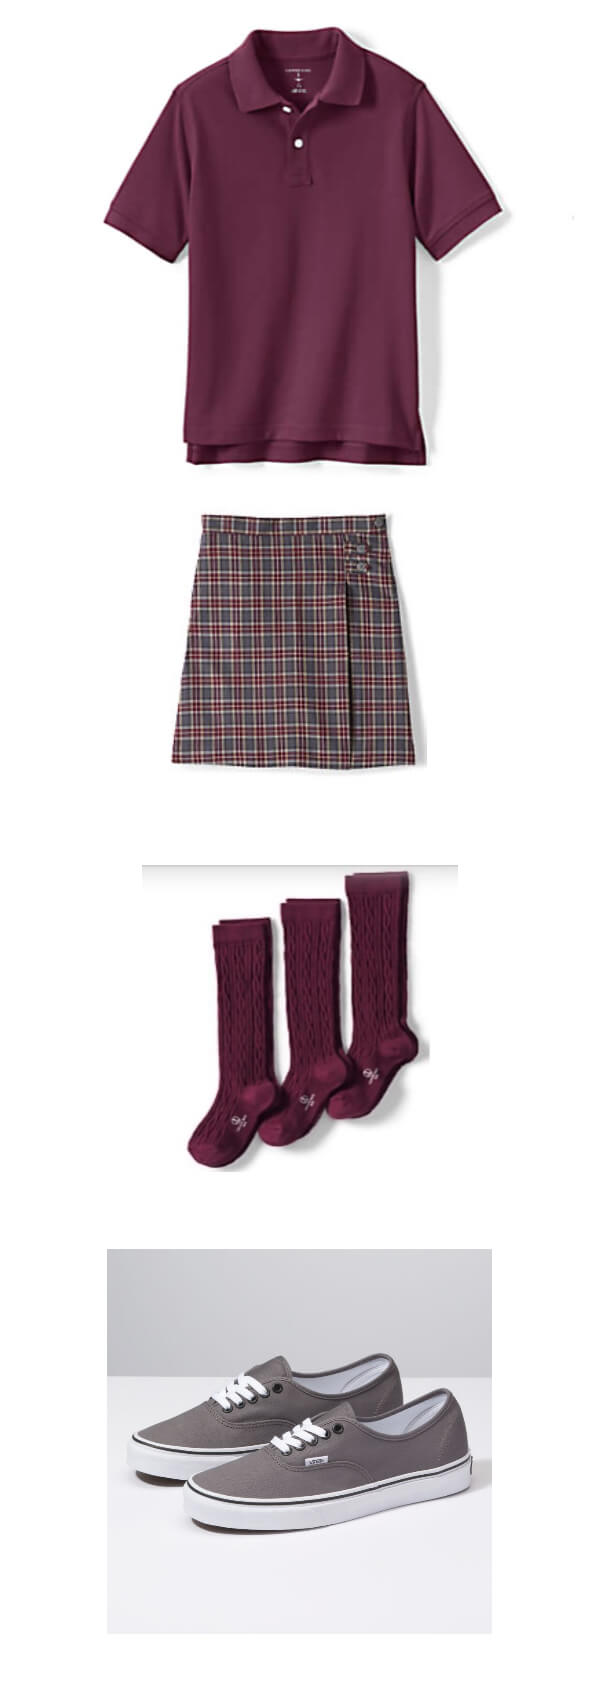 Girls Fall And Spring Uniform